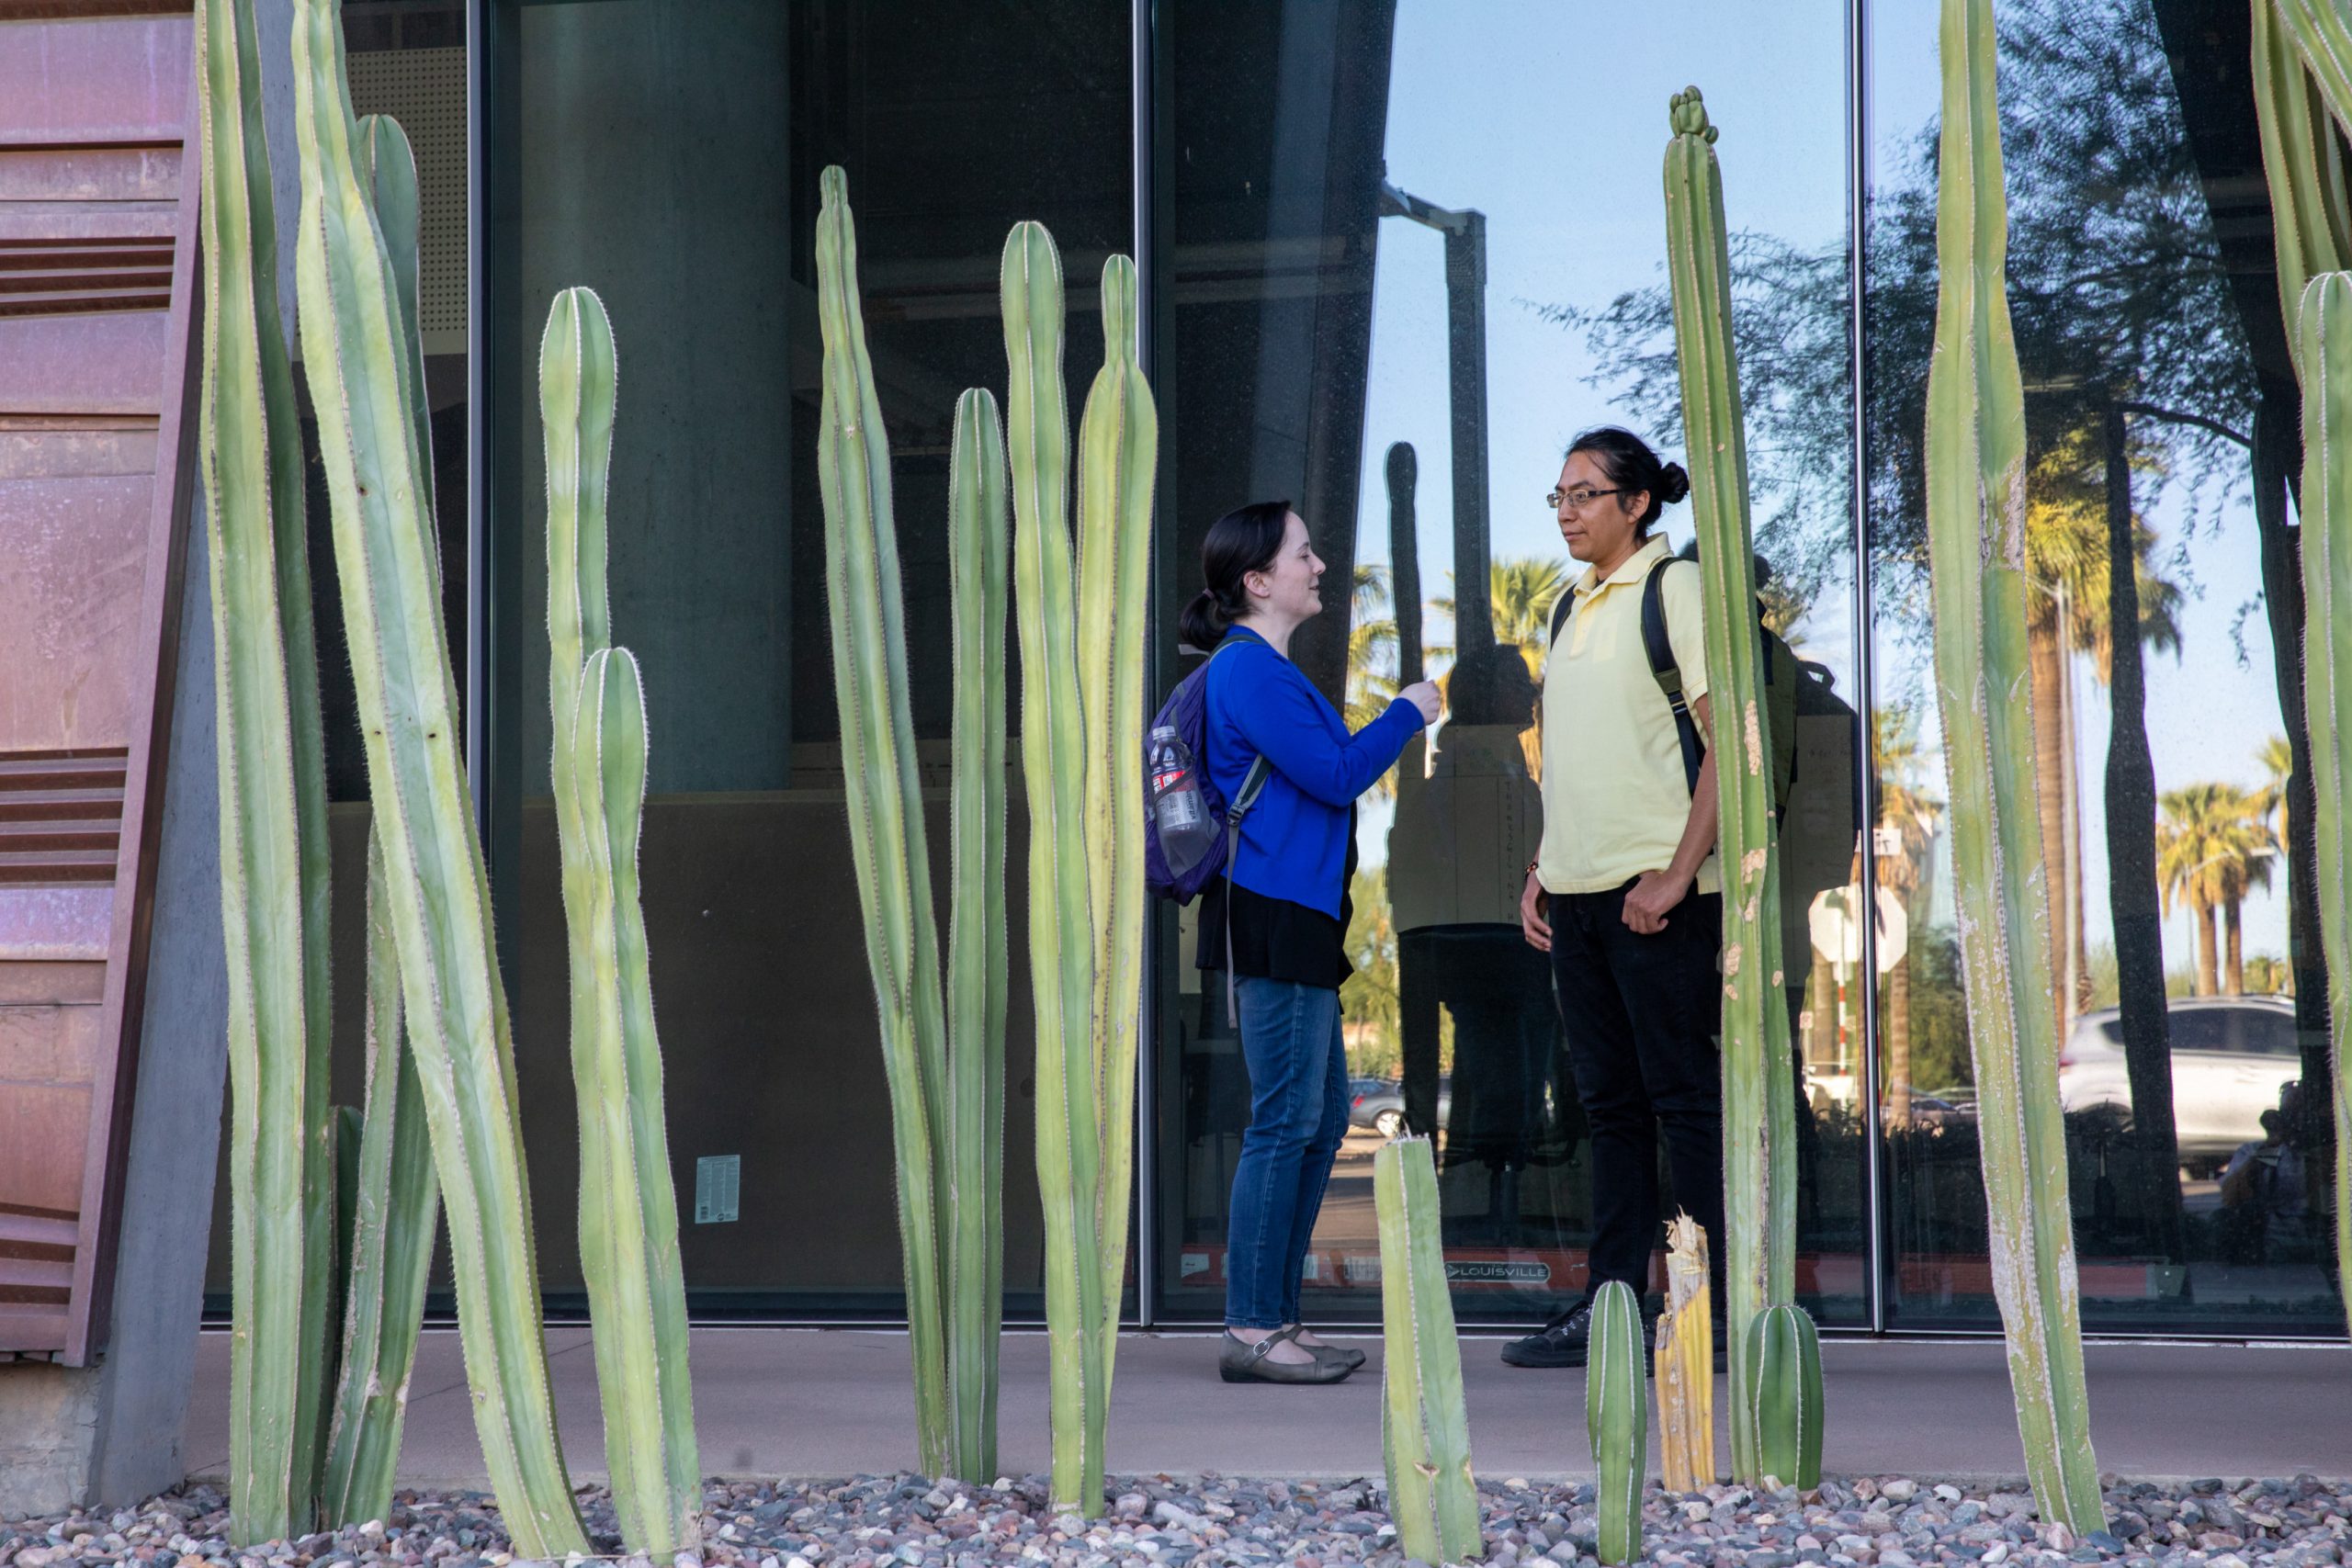 Students chatting outside near cacti at an NAU statewide campus.